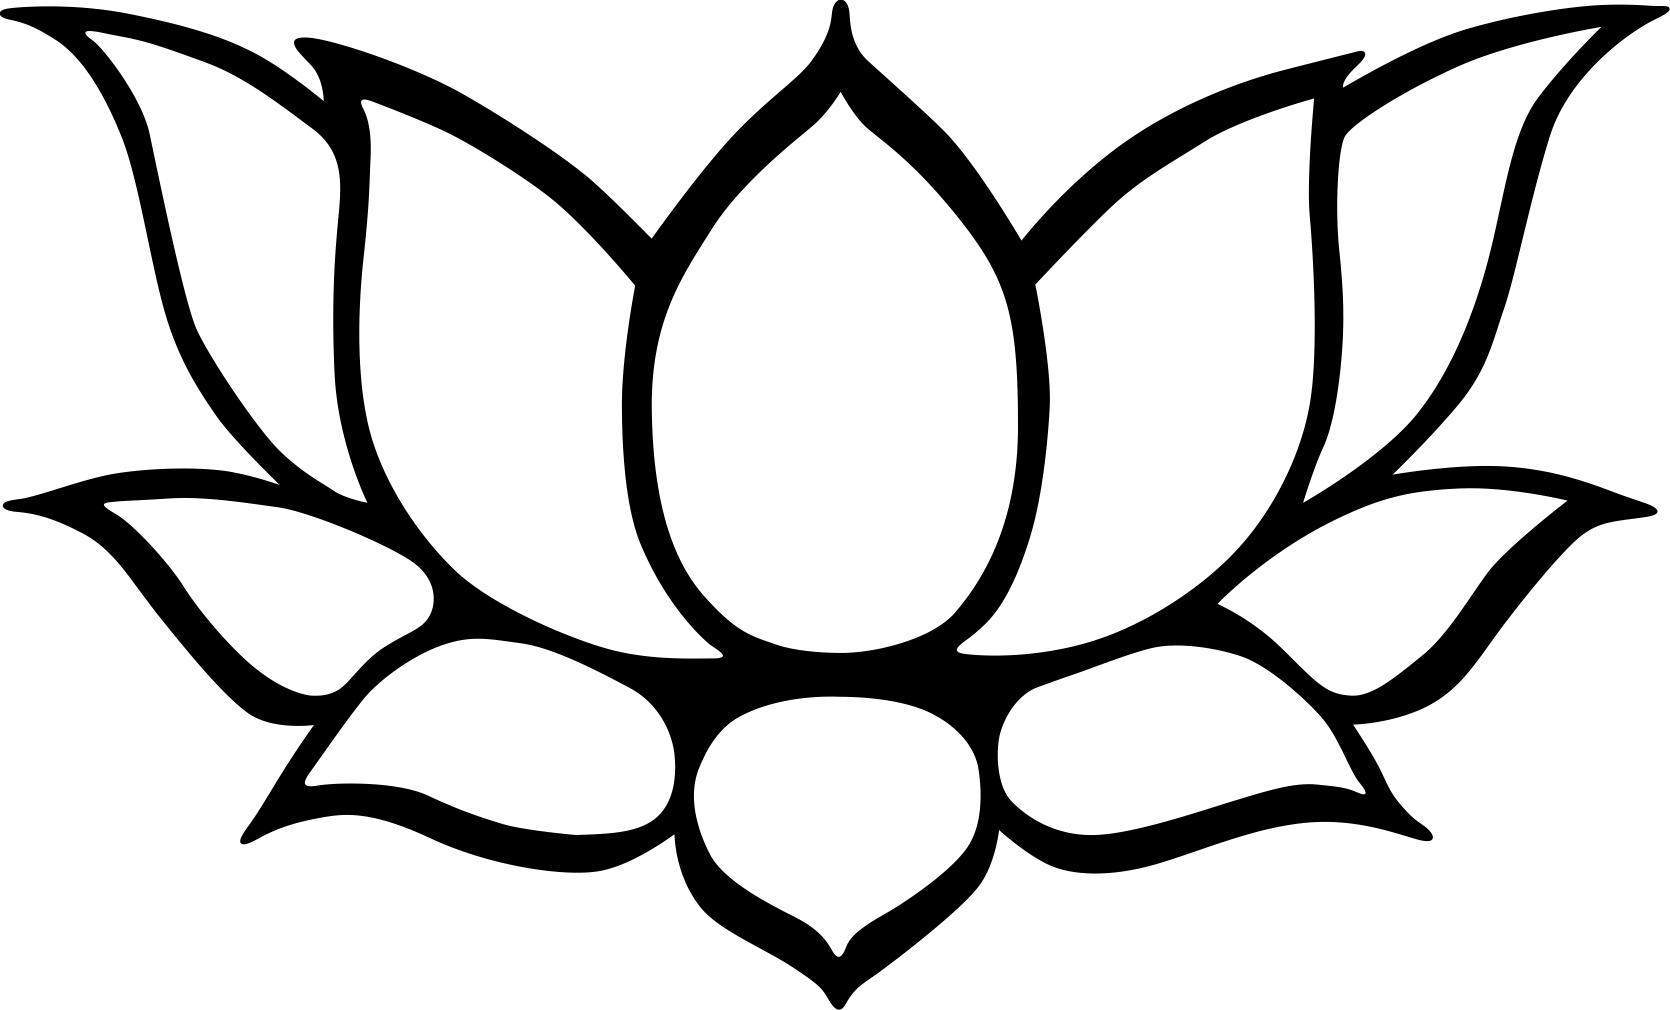 How To Draw A Lotus Flower - Clipart library